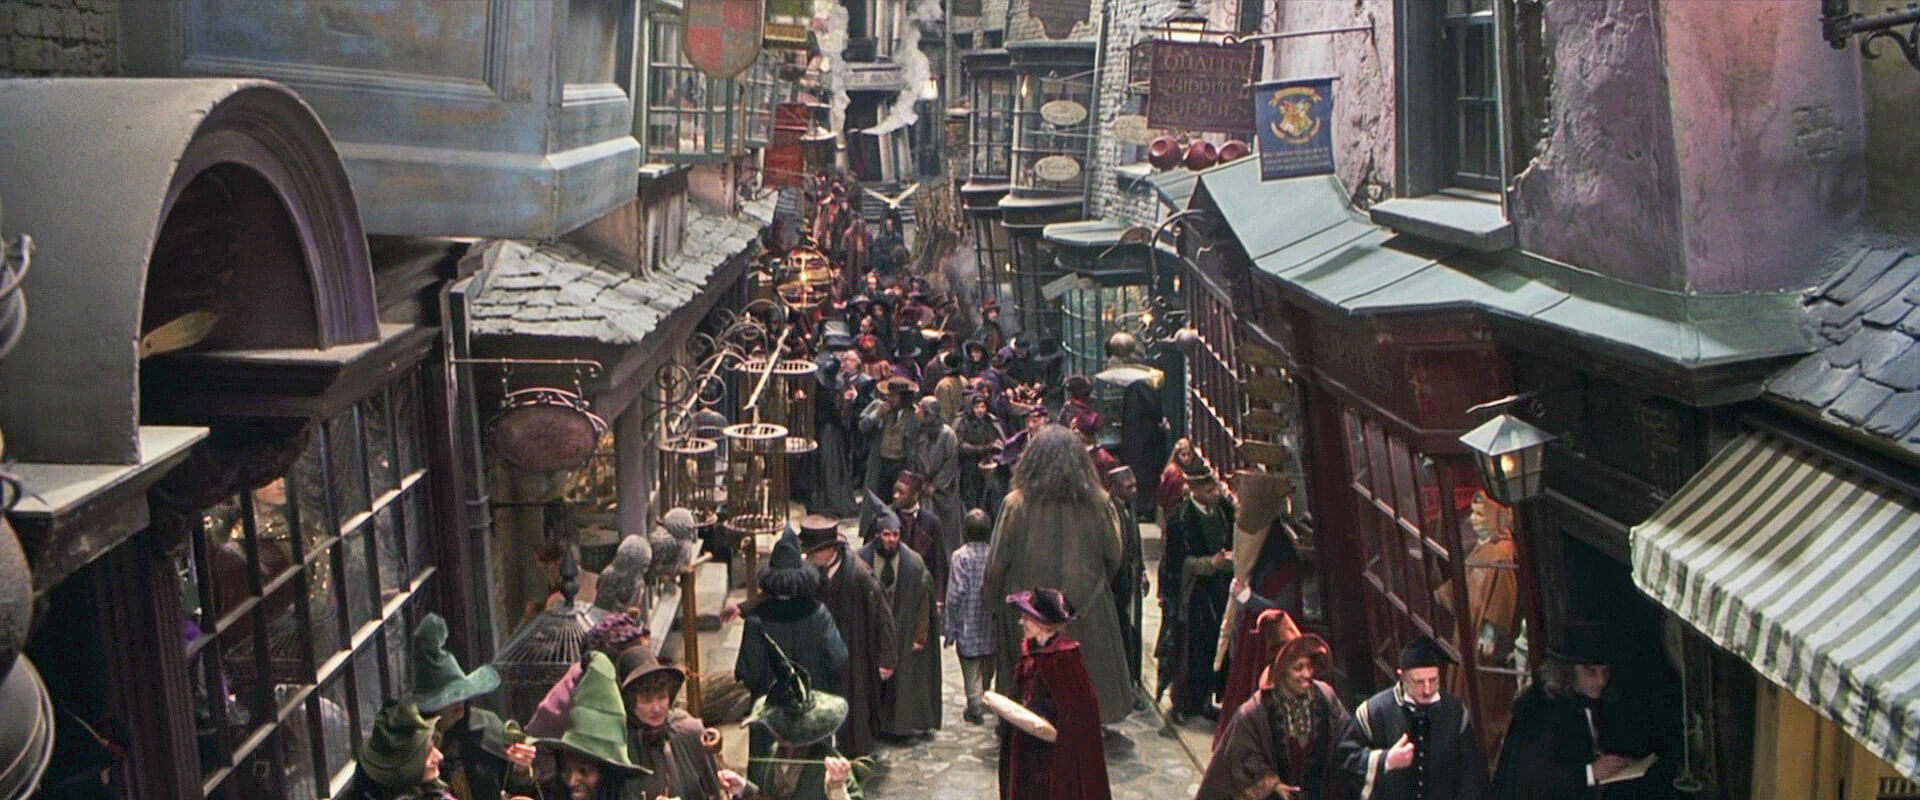 Harry and Hagrid visit Diagon Alley before Harry's first year at Hogwarts.